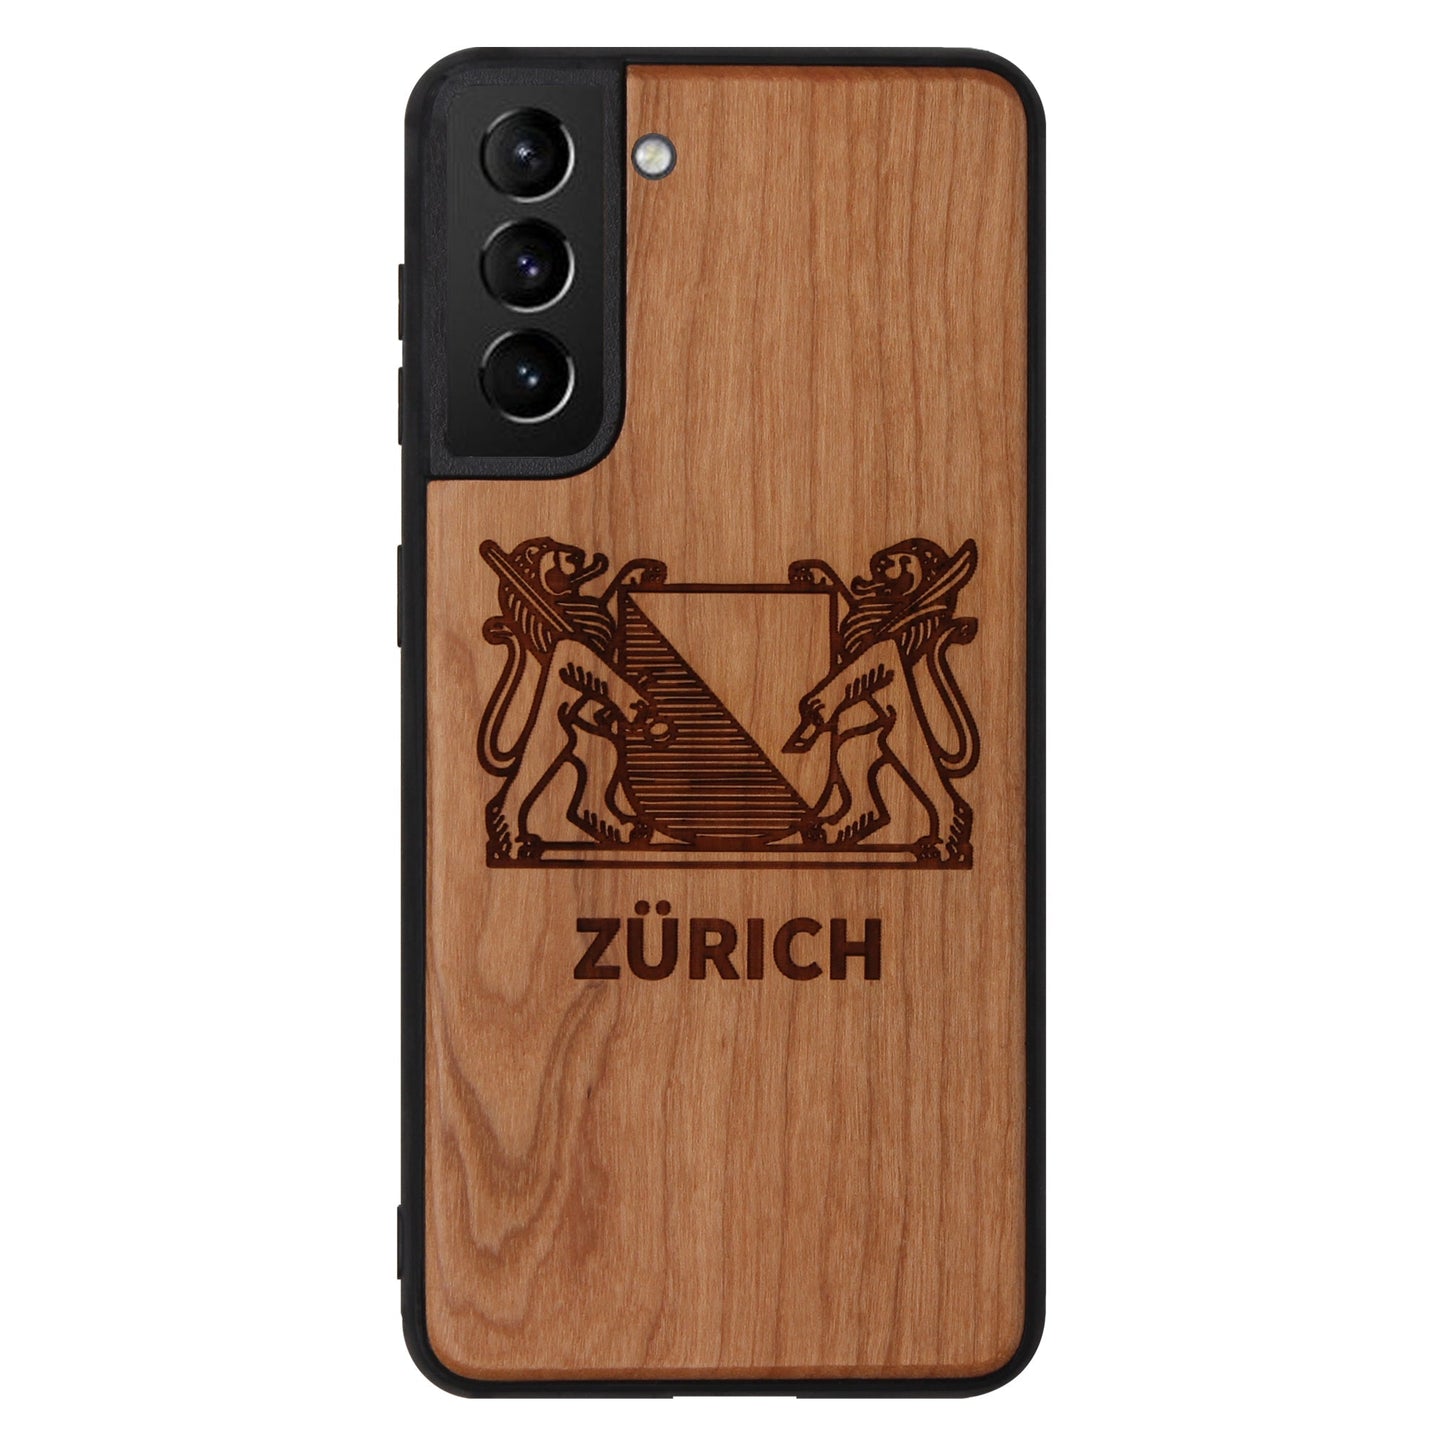 Zurich coat of arms Eden case made of cherry wood for Samsung Galaxy S21 Plus